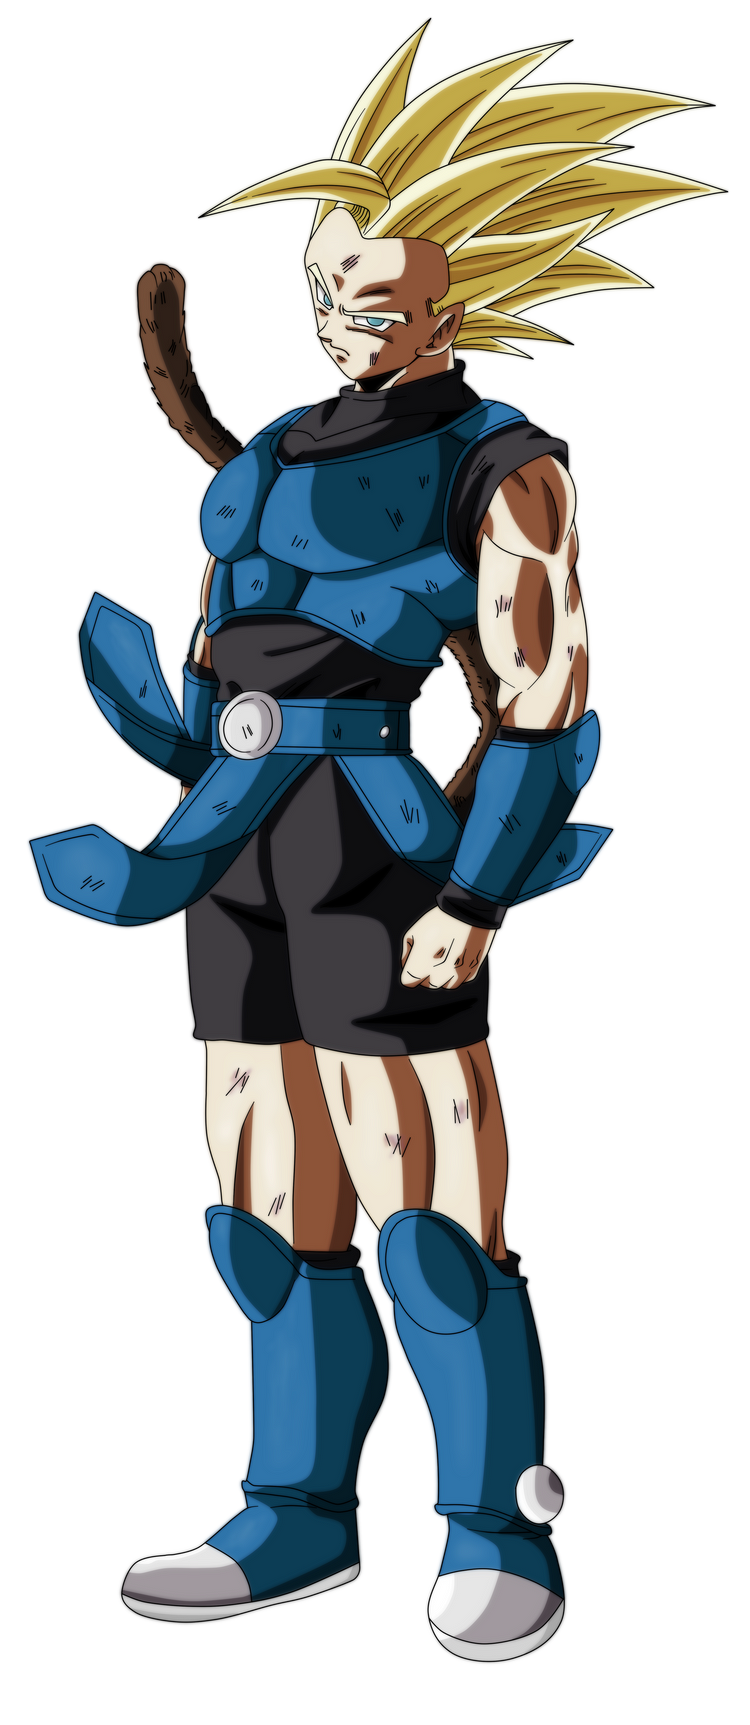 Predictions for Shallot's next Form after SSJB Shallot is about to reach  the Great powers of Super Saiyan Blue, people have wondered what will come  after that, many people believe (so do